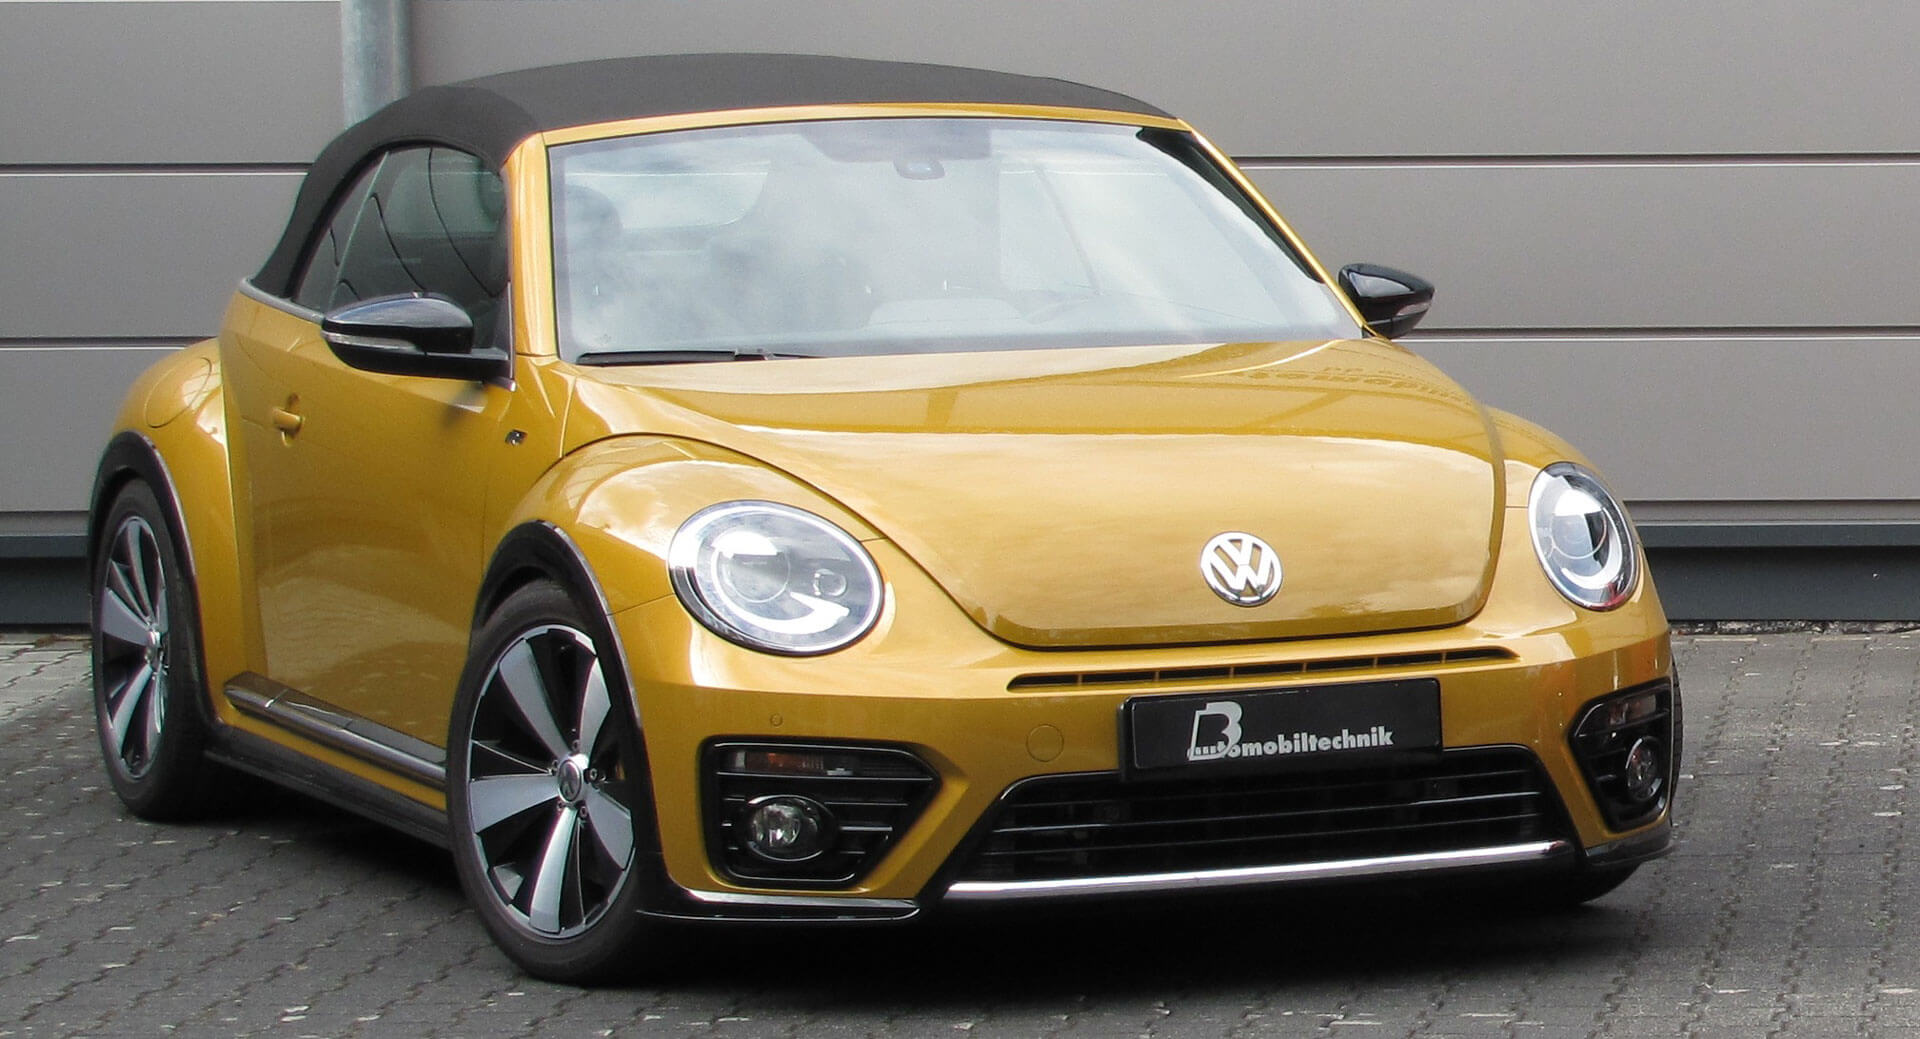 B&BTuned VW Beetle Convertible Has 380 PS, Hits 62 MPH In